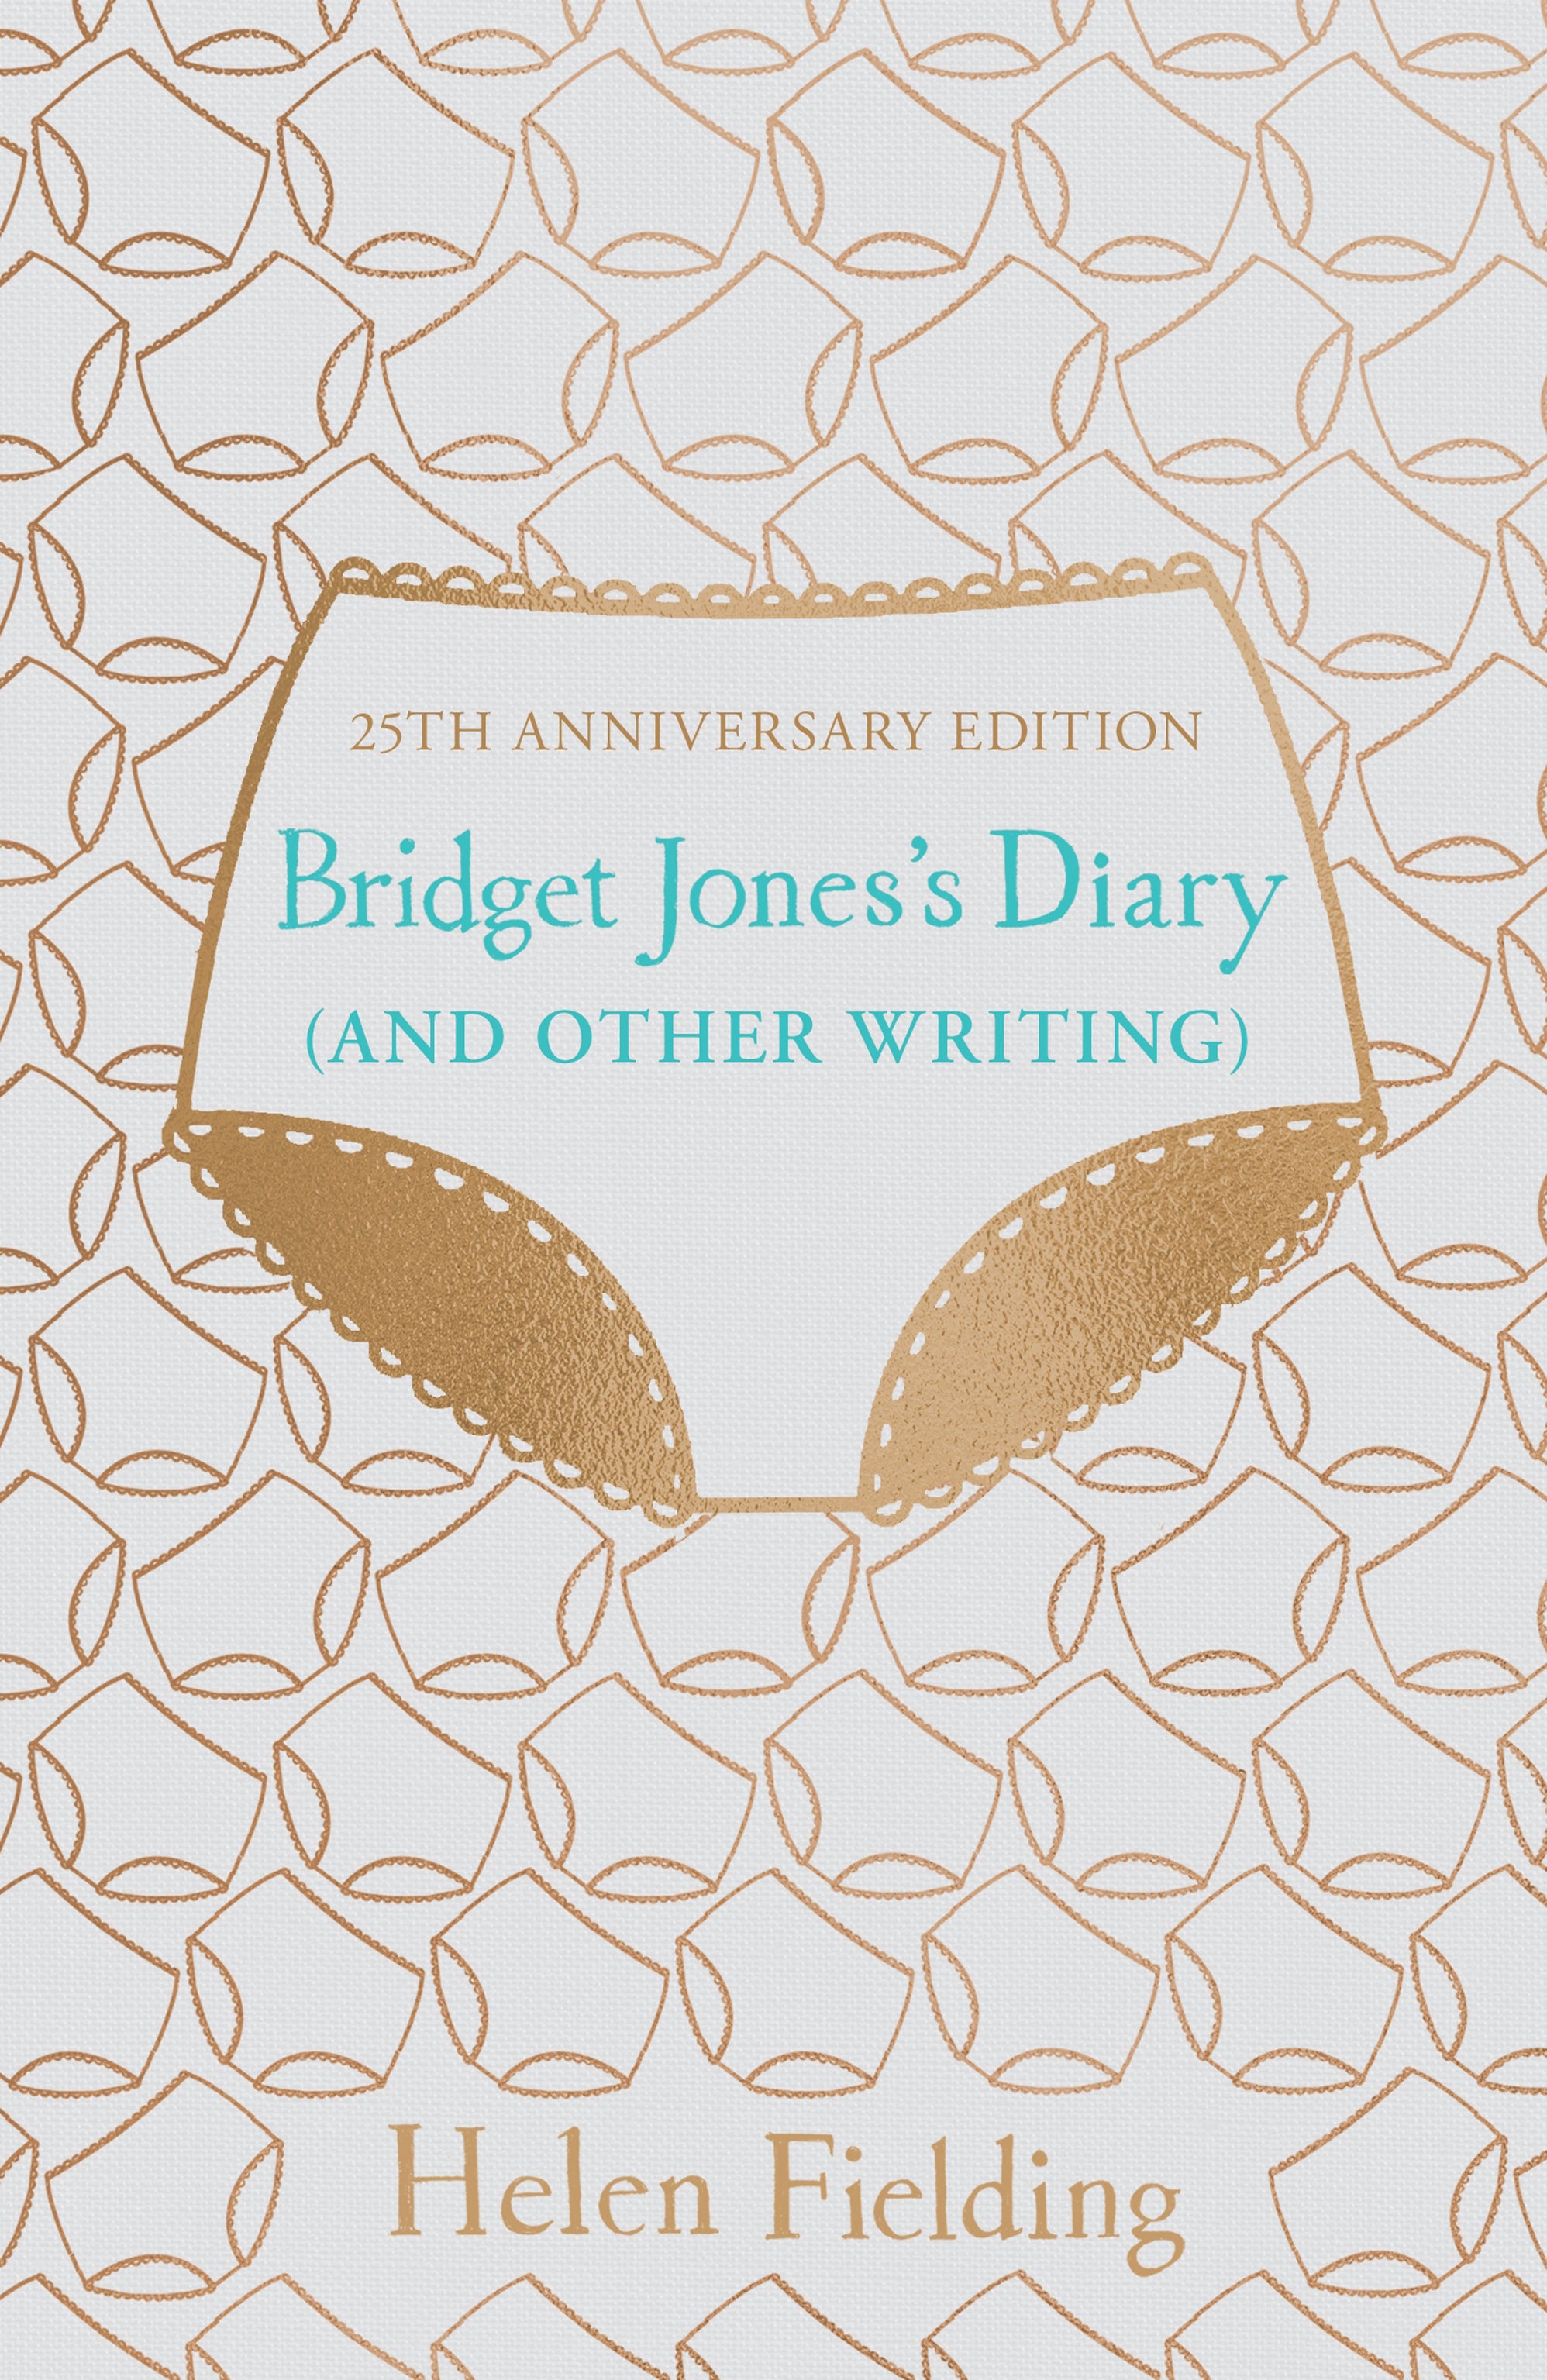 Book jacket of Bridget Jones's Diary (And Other Writing), 25th anniversary edition (Picador/PA)